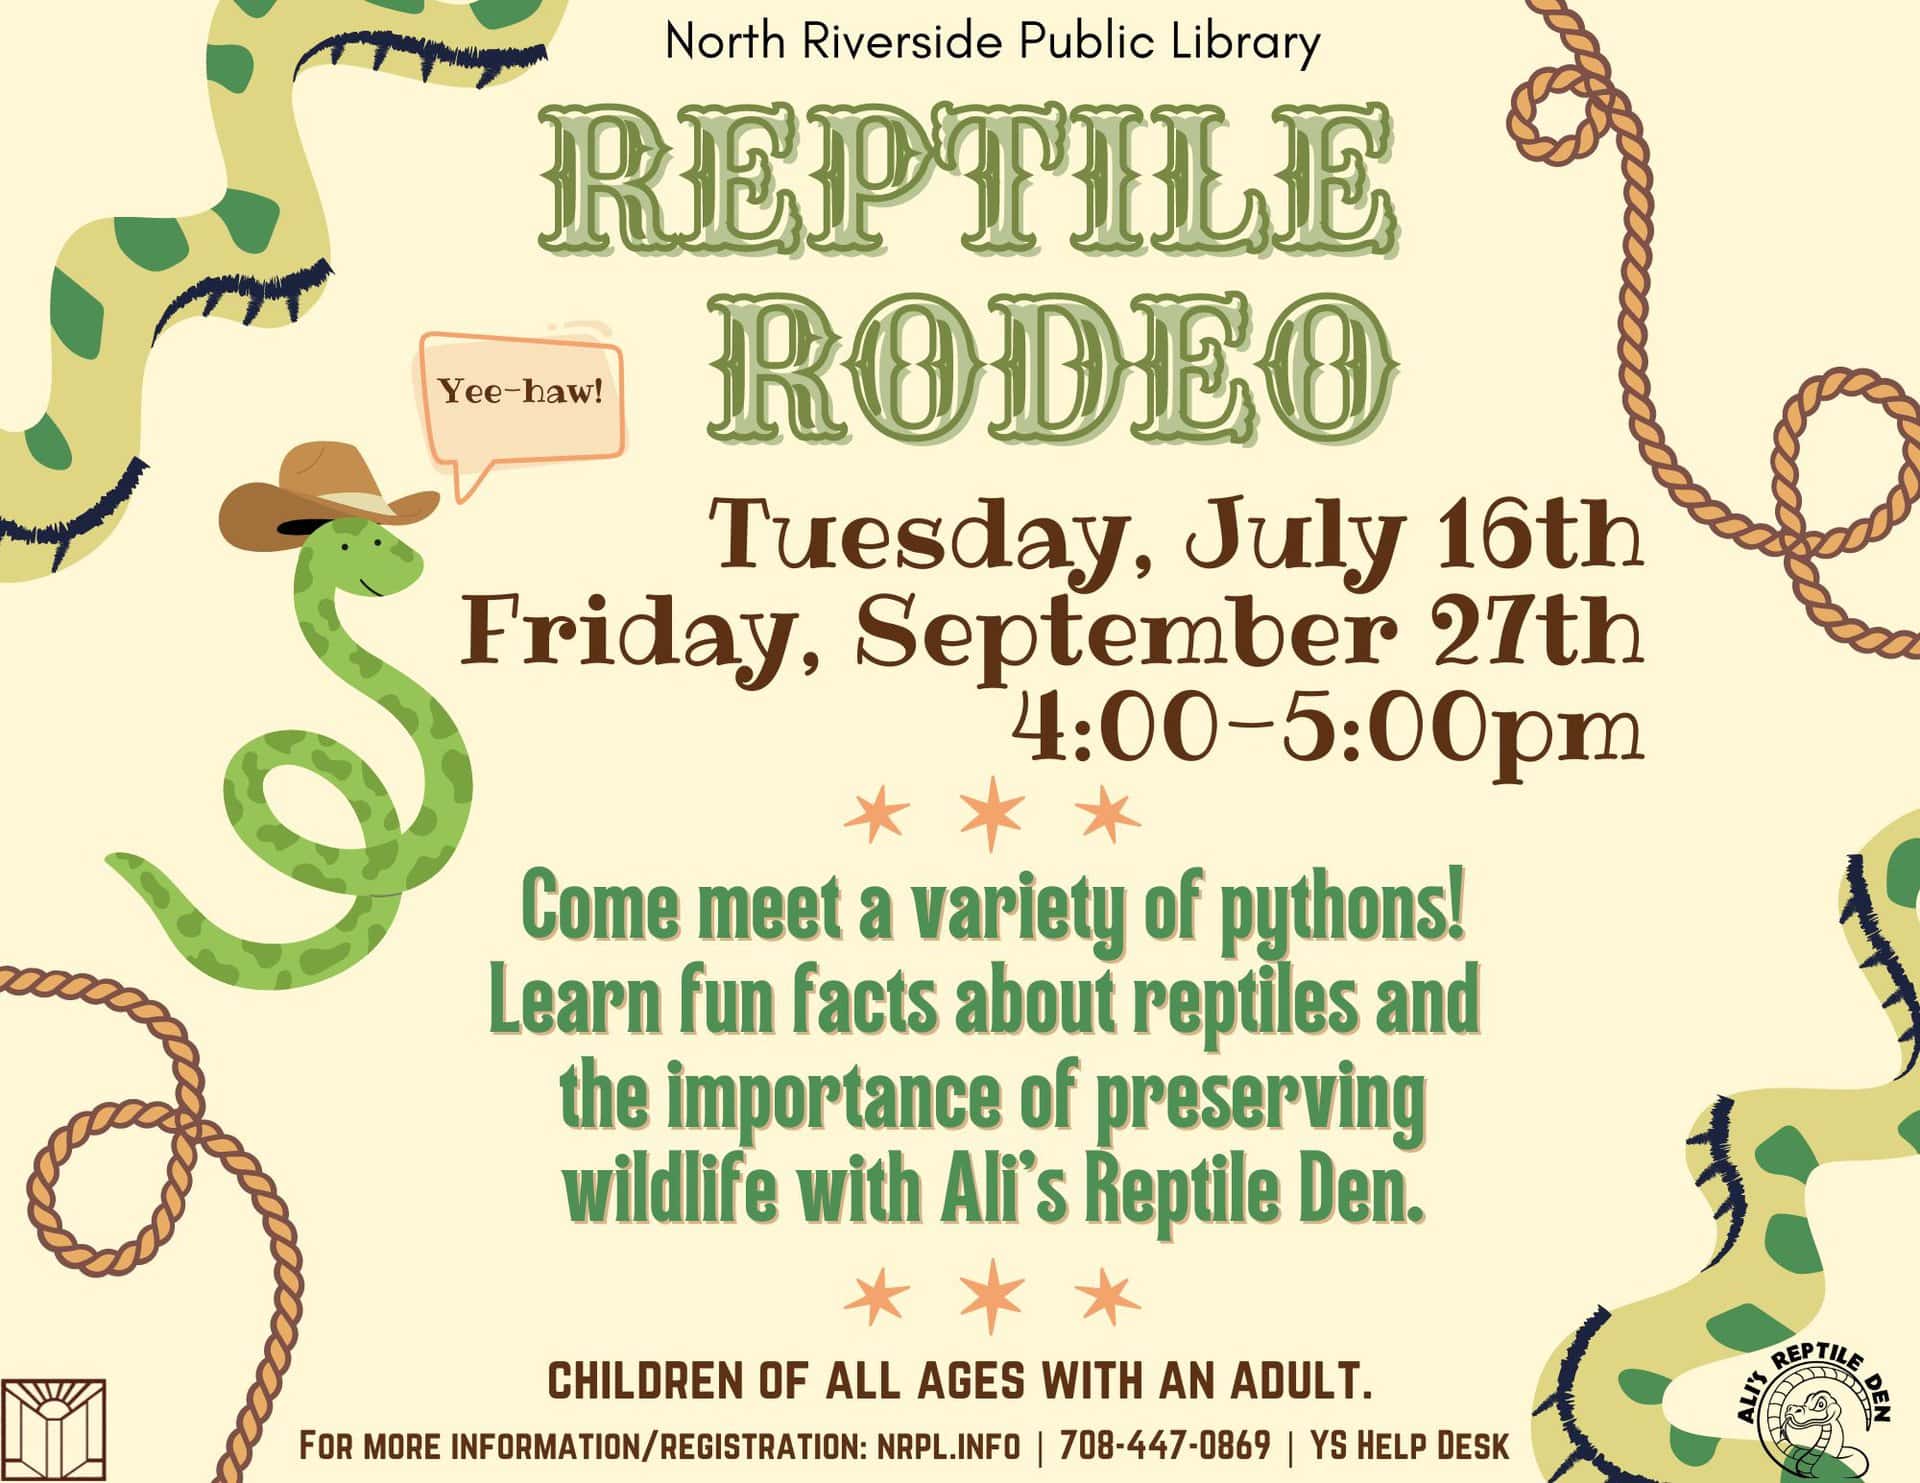 REPTILE RODEO. Tuesday, July 16th Friday, September 27th 4:00-5:00pm. Ali’s Reptile Den will bring new snakes and reptiles to view and learn about! children of all ages with an adult. For more information/registration: nrpl.info | 708-447-0869 | YS Help Desk